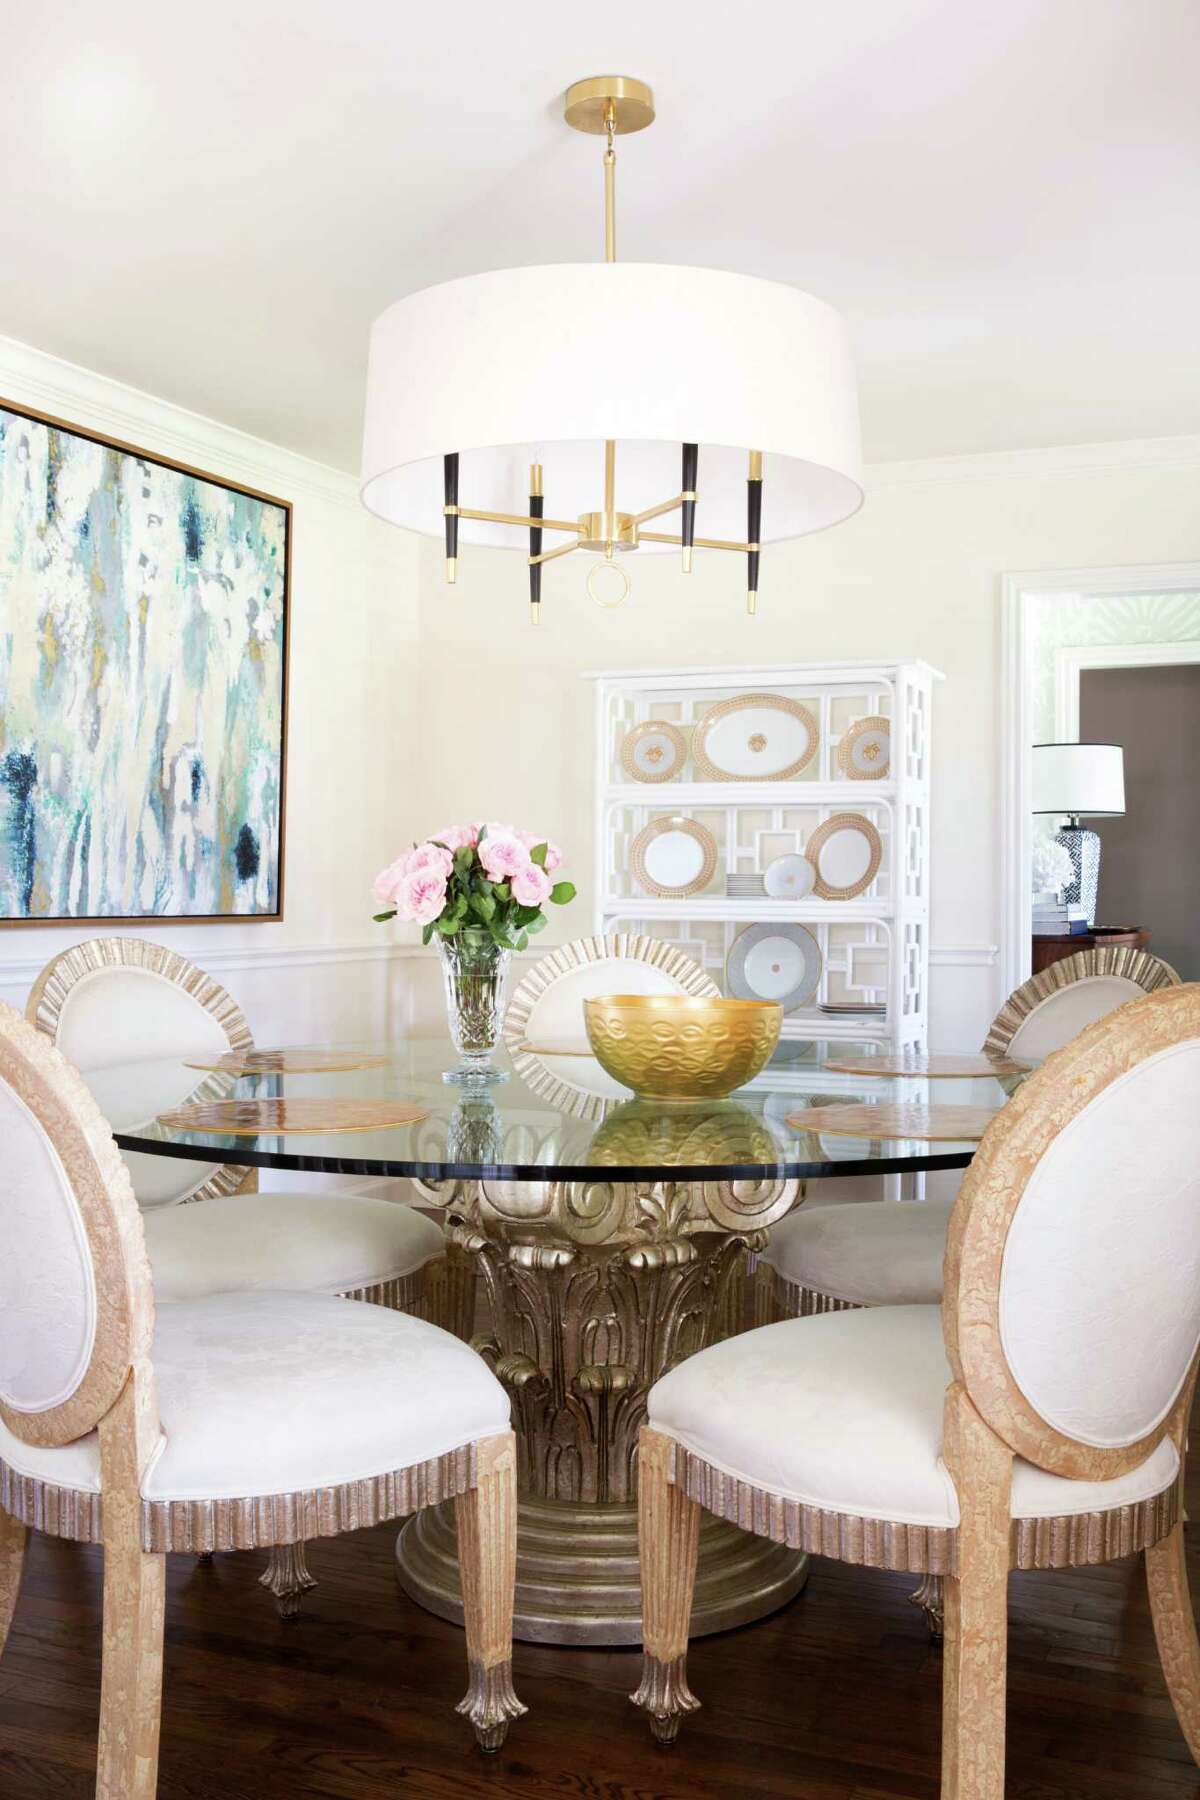 The dining room has a retro feel, with a Jonathan Adler light fixture and a round glass table that belonged to Barron's grandmother.